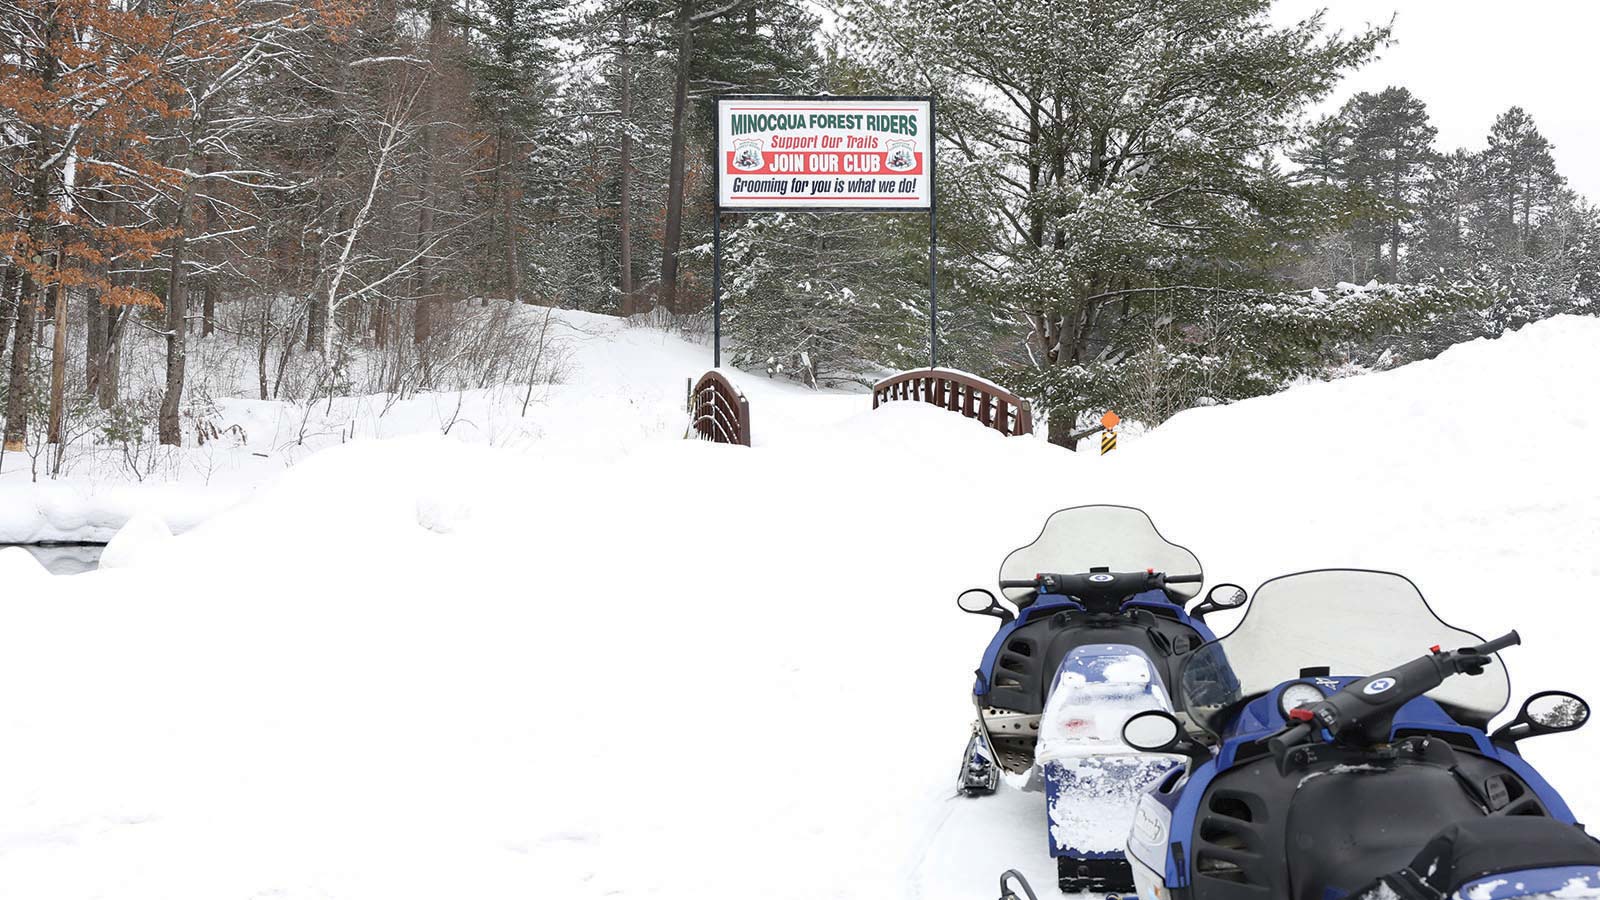 Two snowmobiles on front of a Minocqua Forest Riders trail sign on the snow covered trail